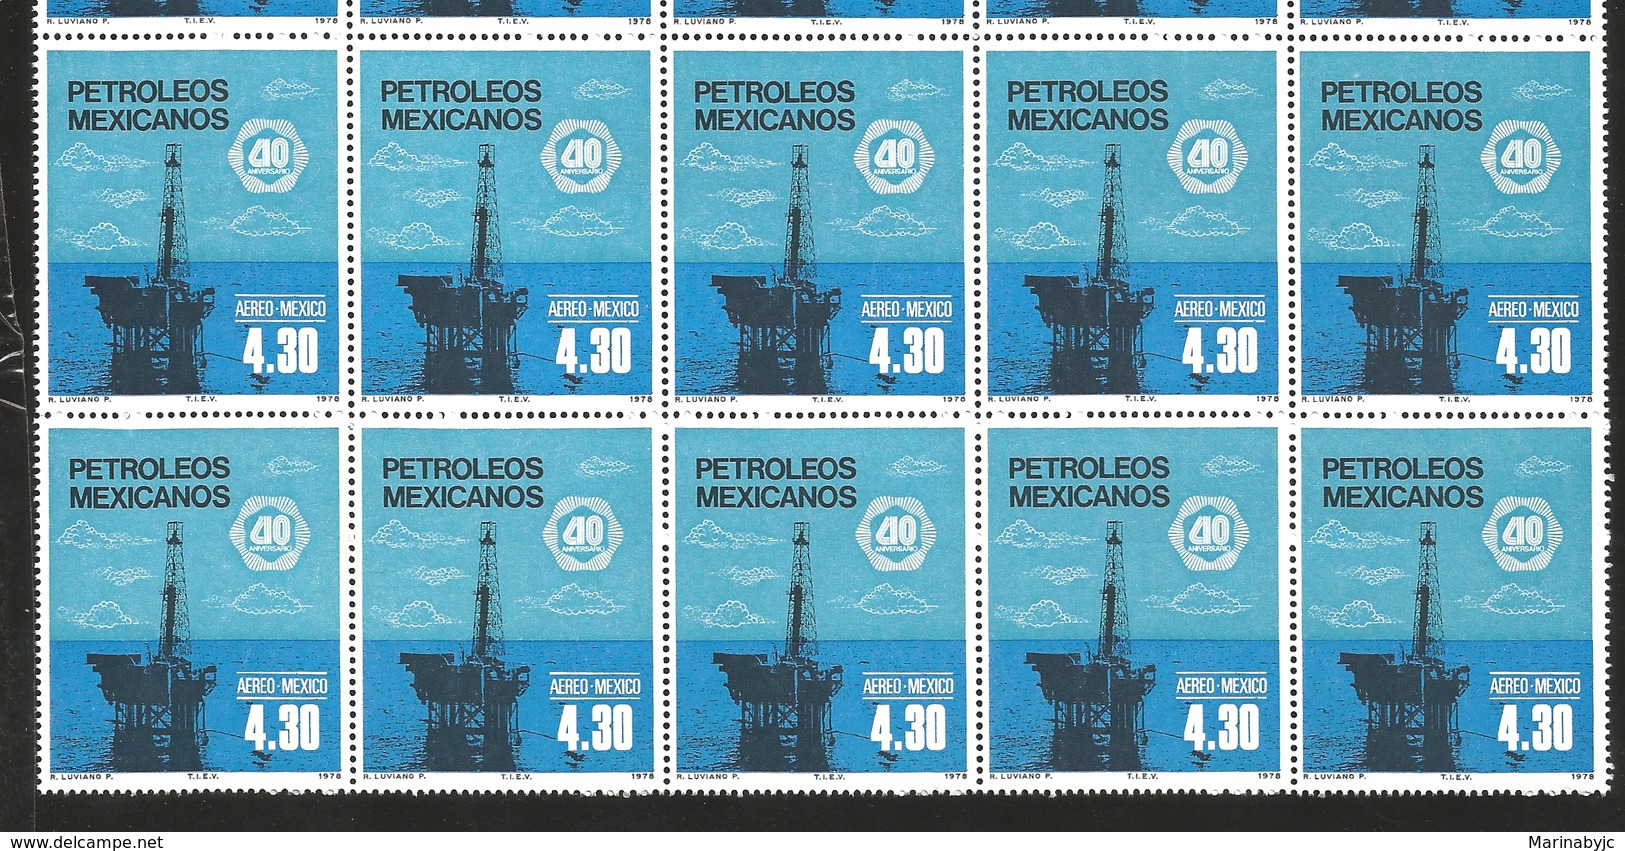 J) 1978 MEXICO, BLOCK OF 10, OIL INDUSTRY NATIONALIZATION, 40TH ANNIVERSARY, OFFSHORE OIL RIG., SCOTT C557, MN - Mexico